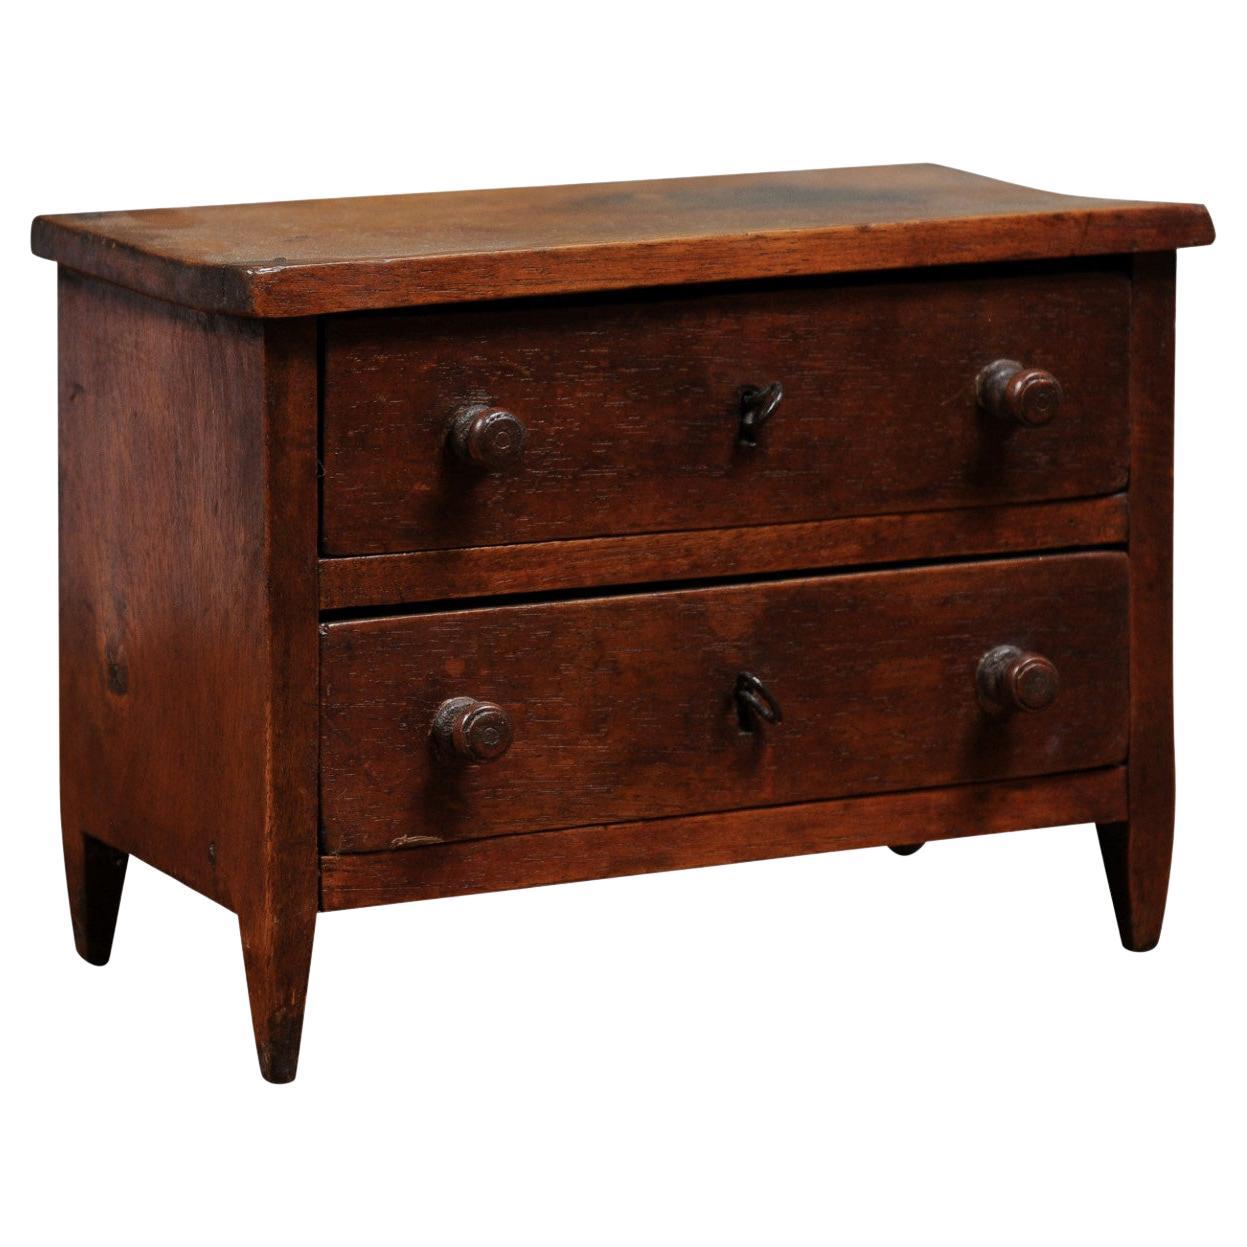 English 19th Century Miniature Walnut Chest with Two Drawers and Brown Patina